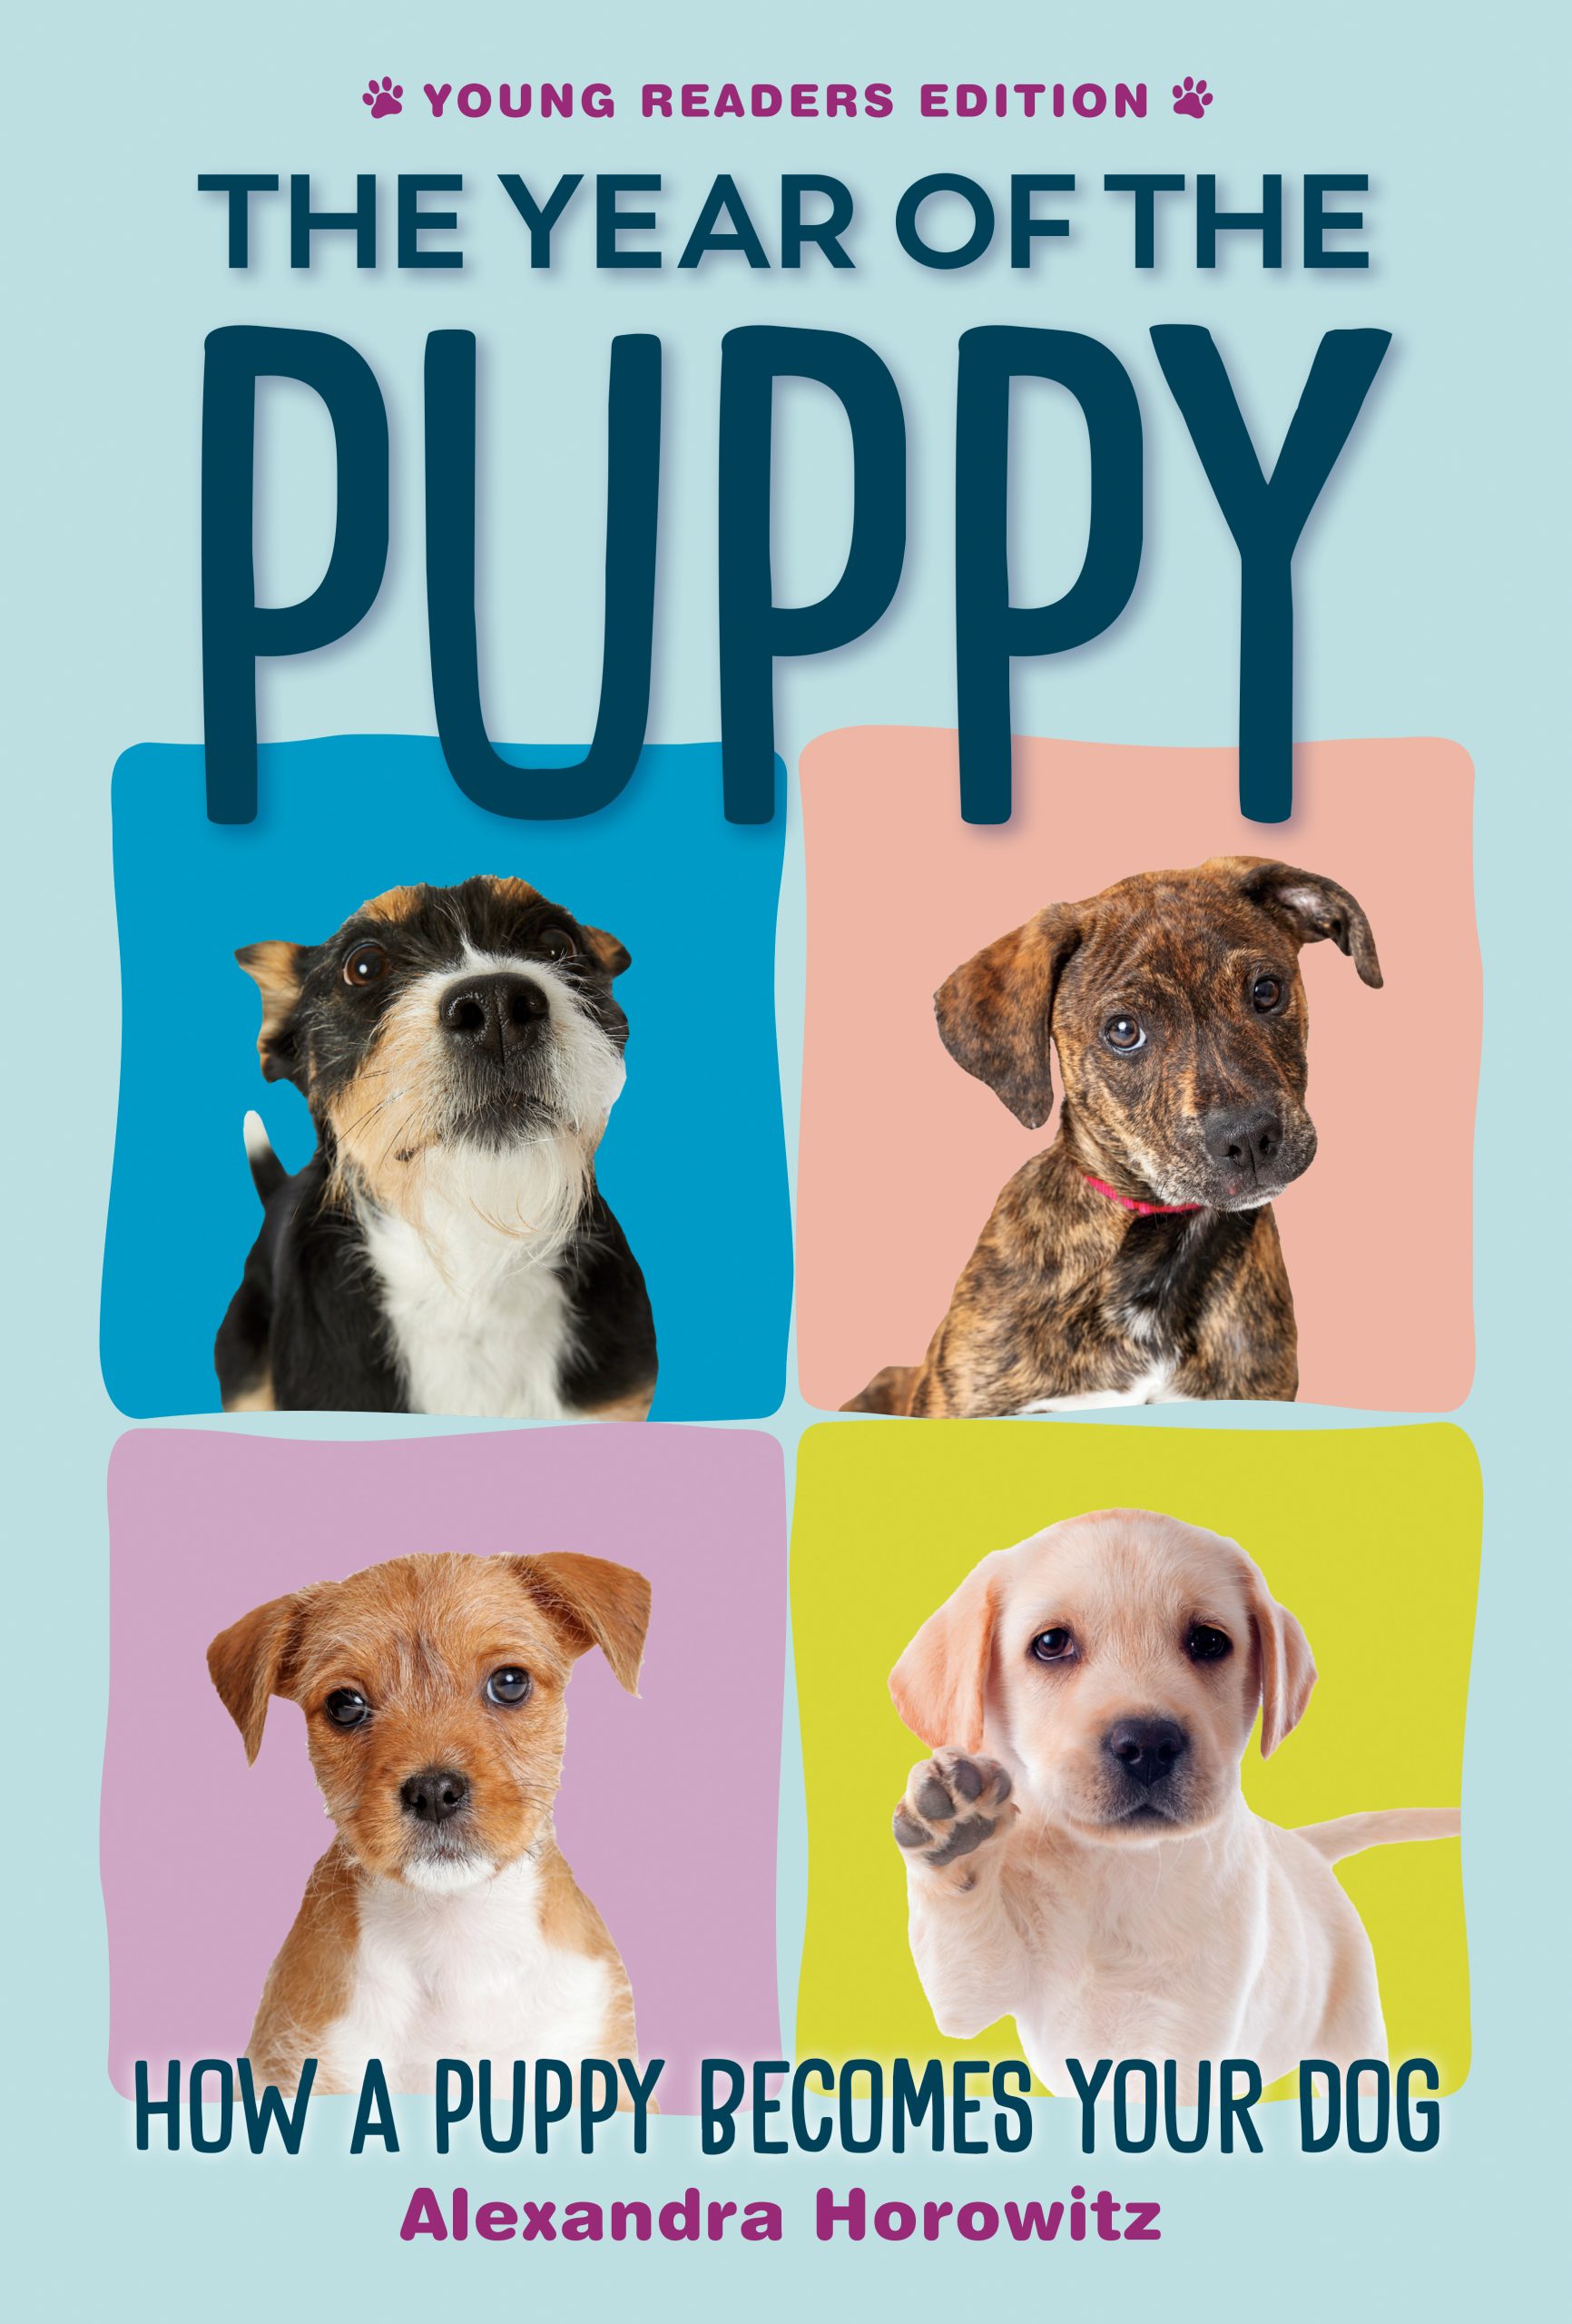 Spotlight on THE YEAR OF THE PUPPY: HOW A PUPPY BECOMES YOUR DOG (Alexandra Horowitz), Excerpt & Giveaway ~ US Only!